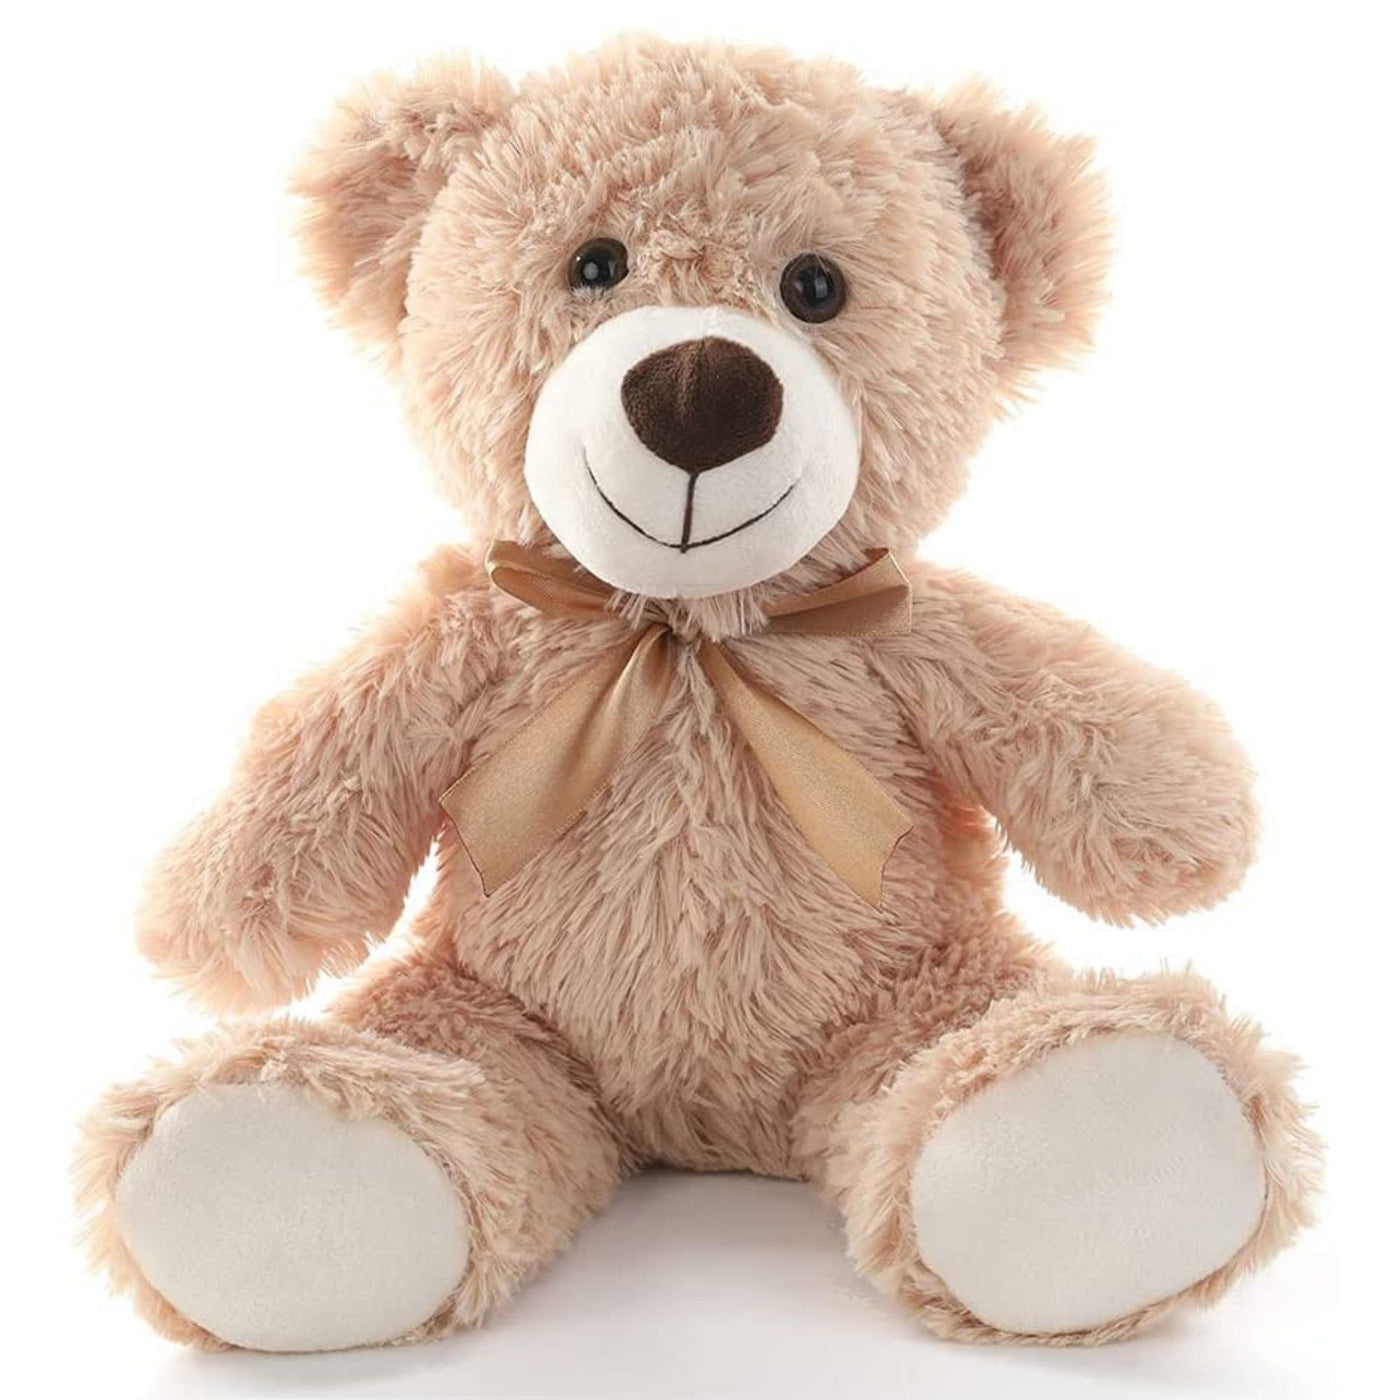 3-Pack Teddy Bears, Light Brown, 13.8 Inches - MorisMos Stuffed Animal Toys